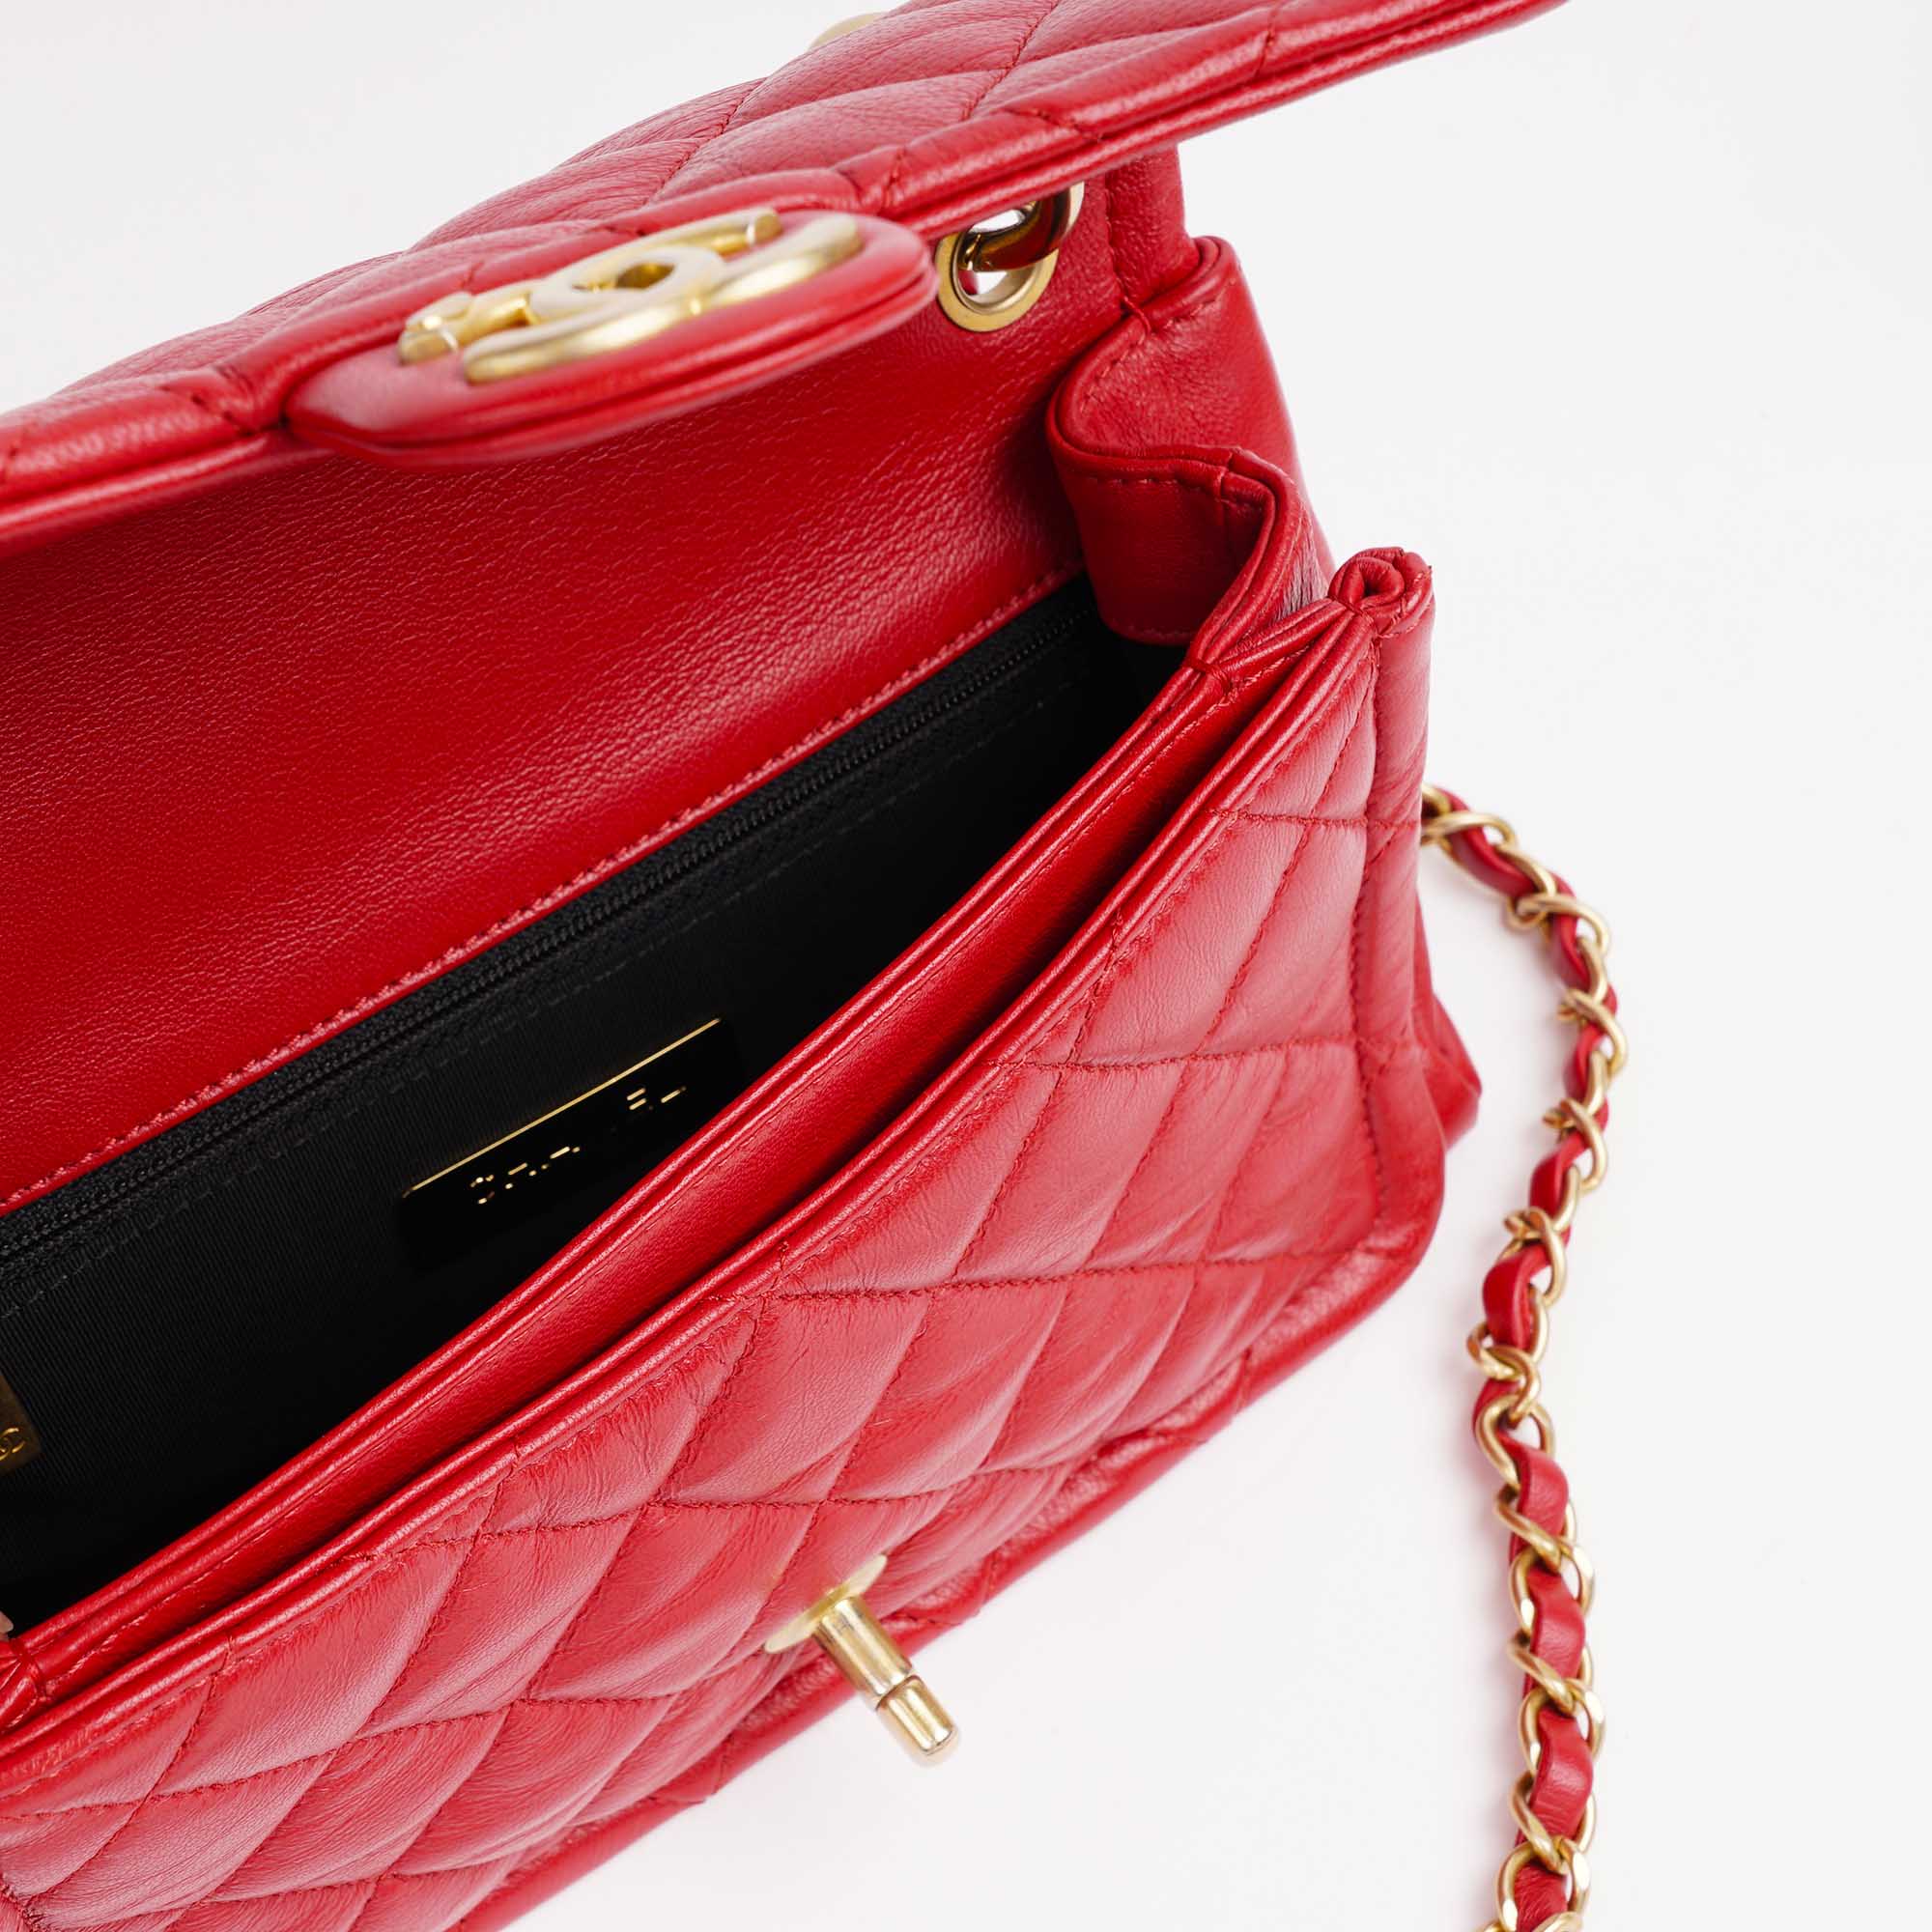 Small Trapezio Flap Bag - CHANEL - Affordable Luxury image